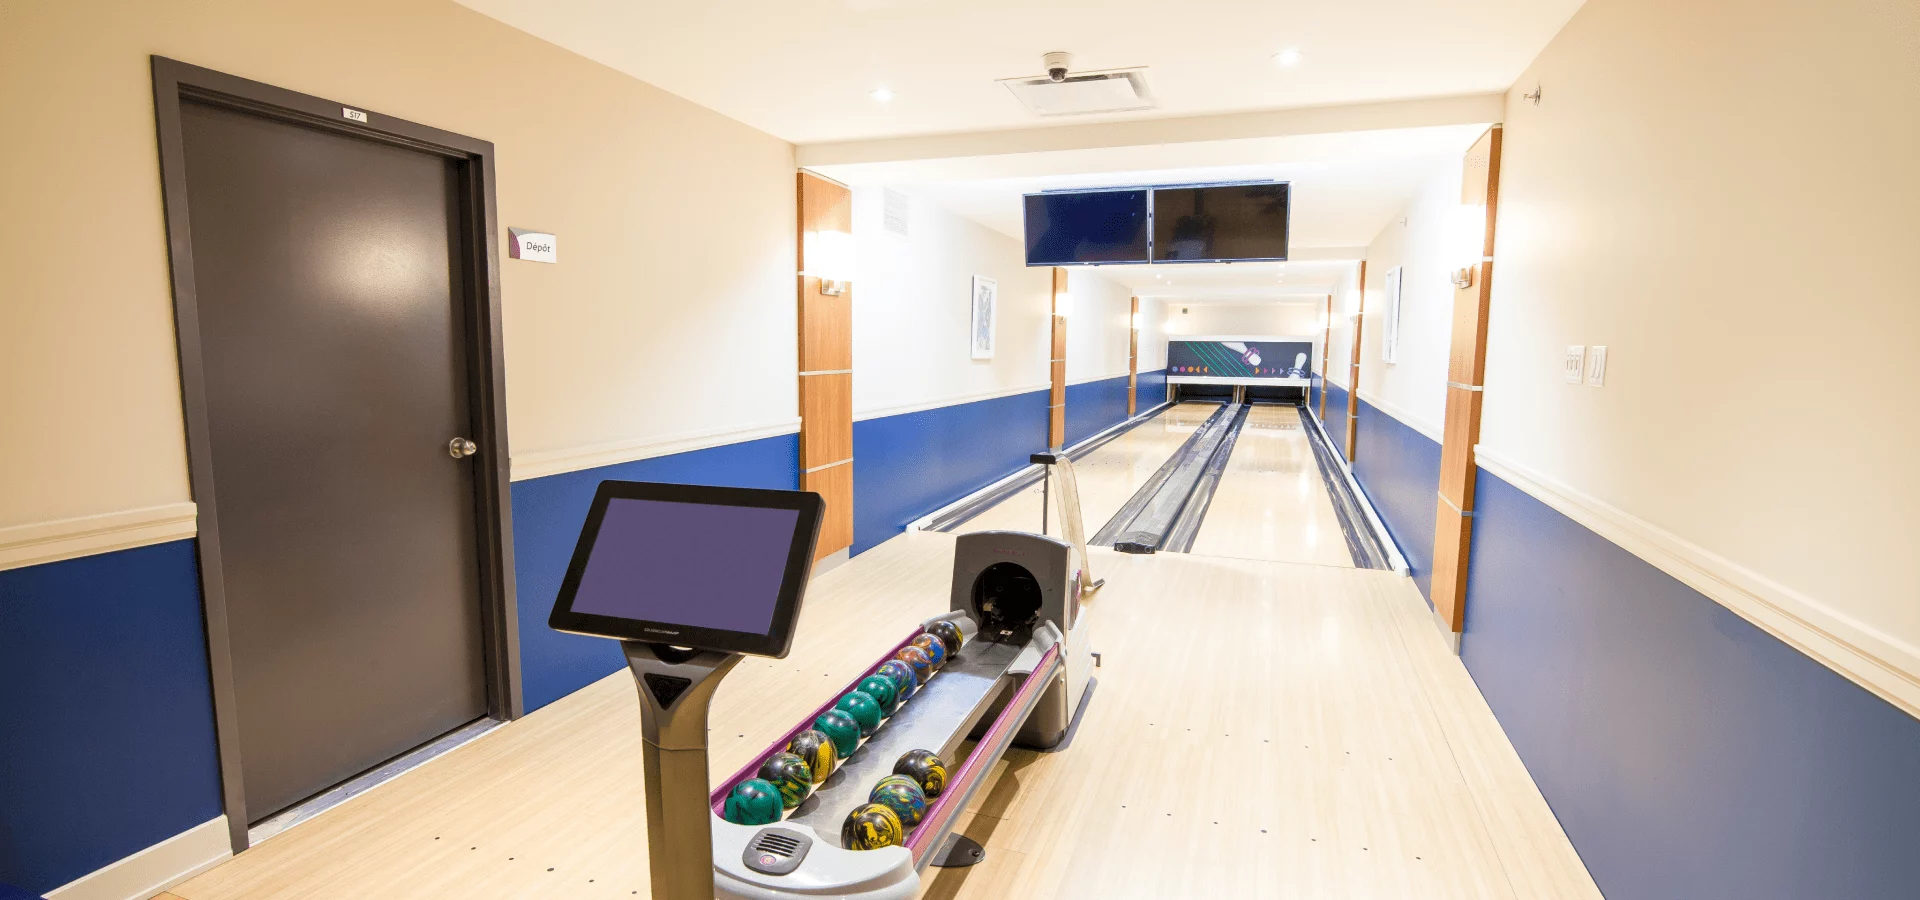 Bowling alley Jazz Drummondville Residence